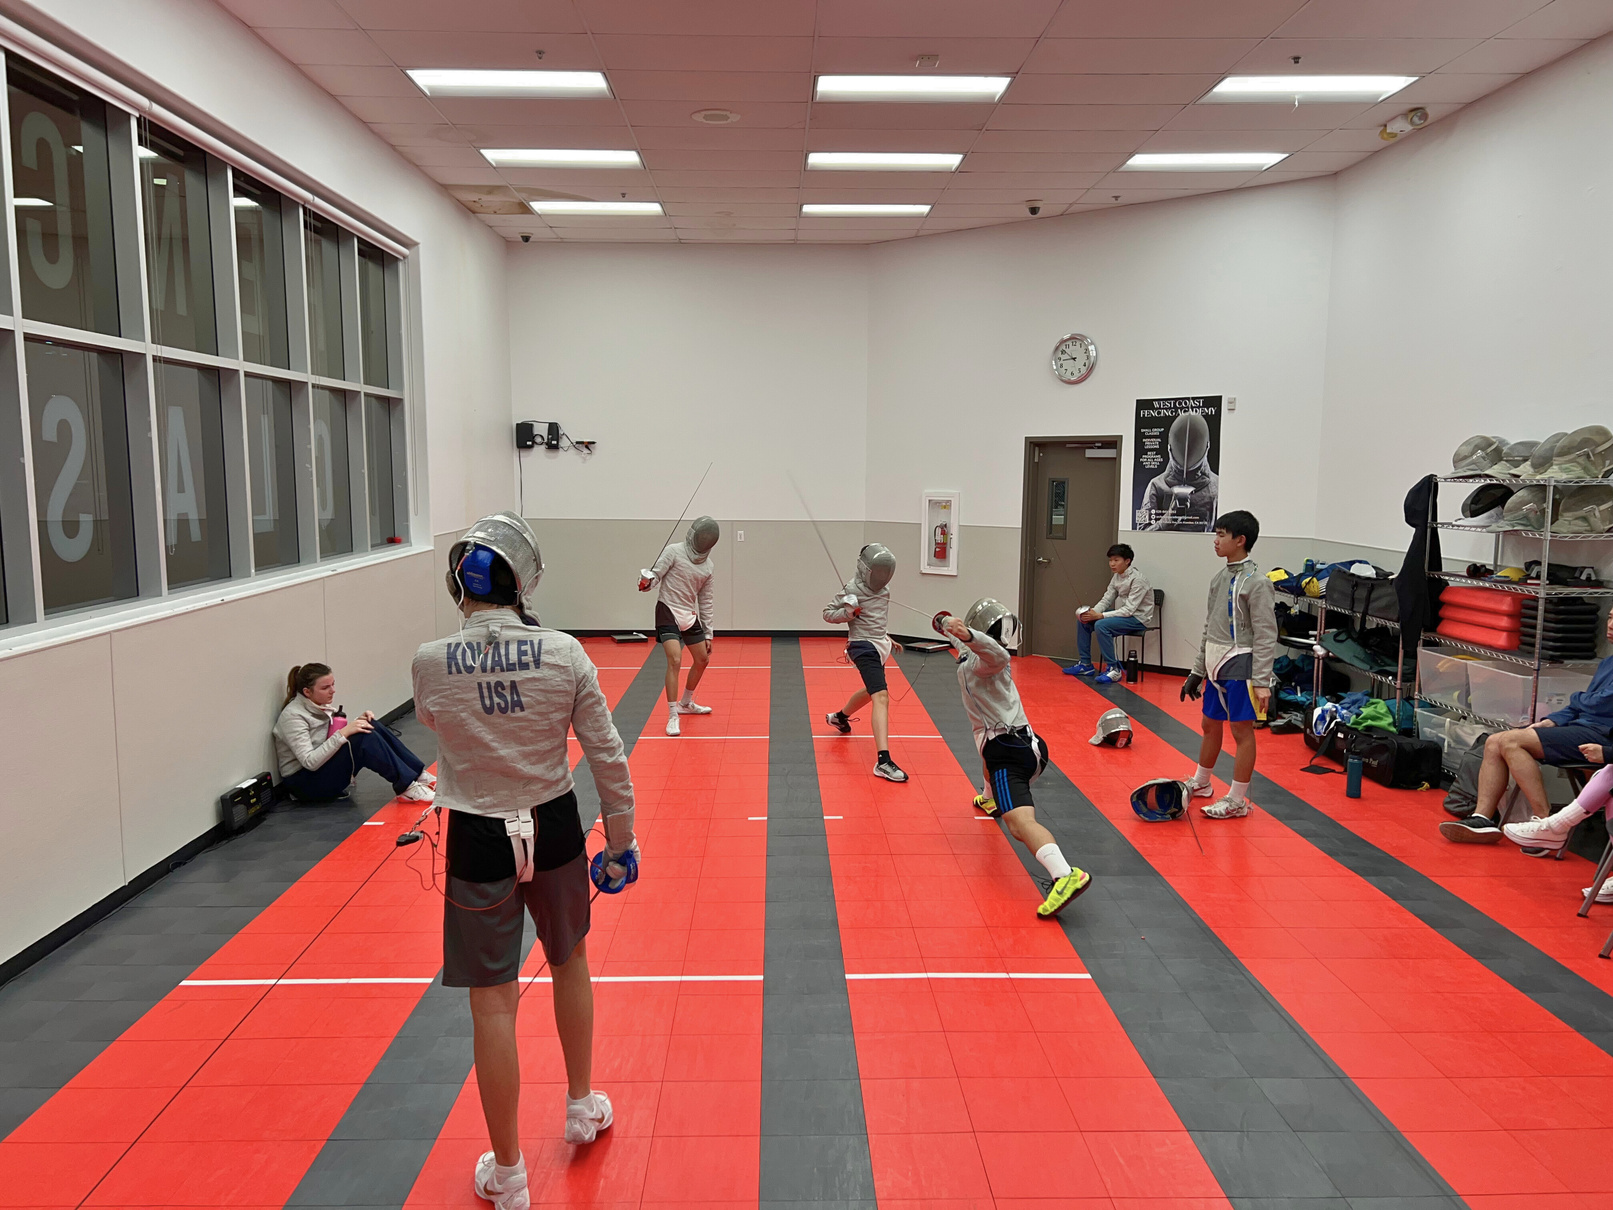 a group of people playing fencing in a gym